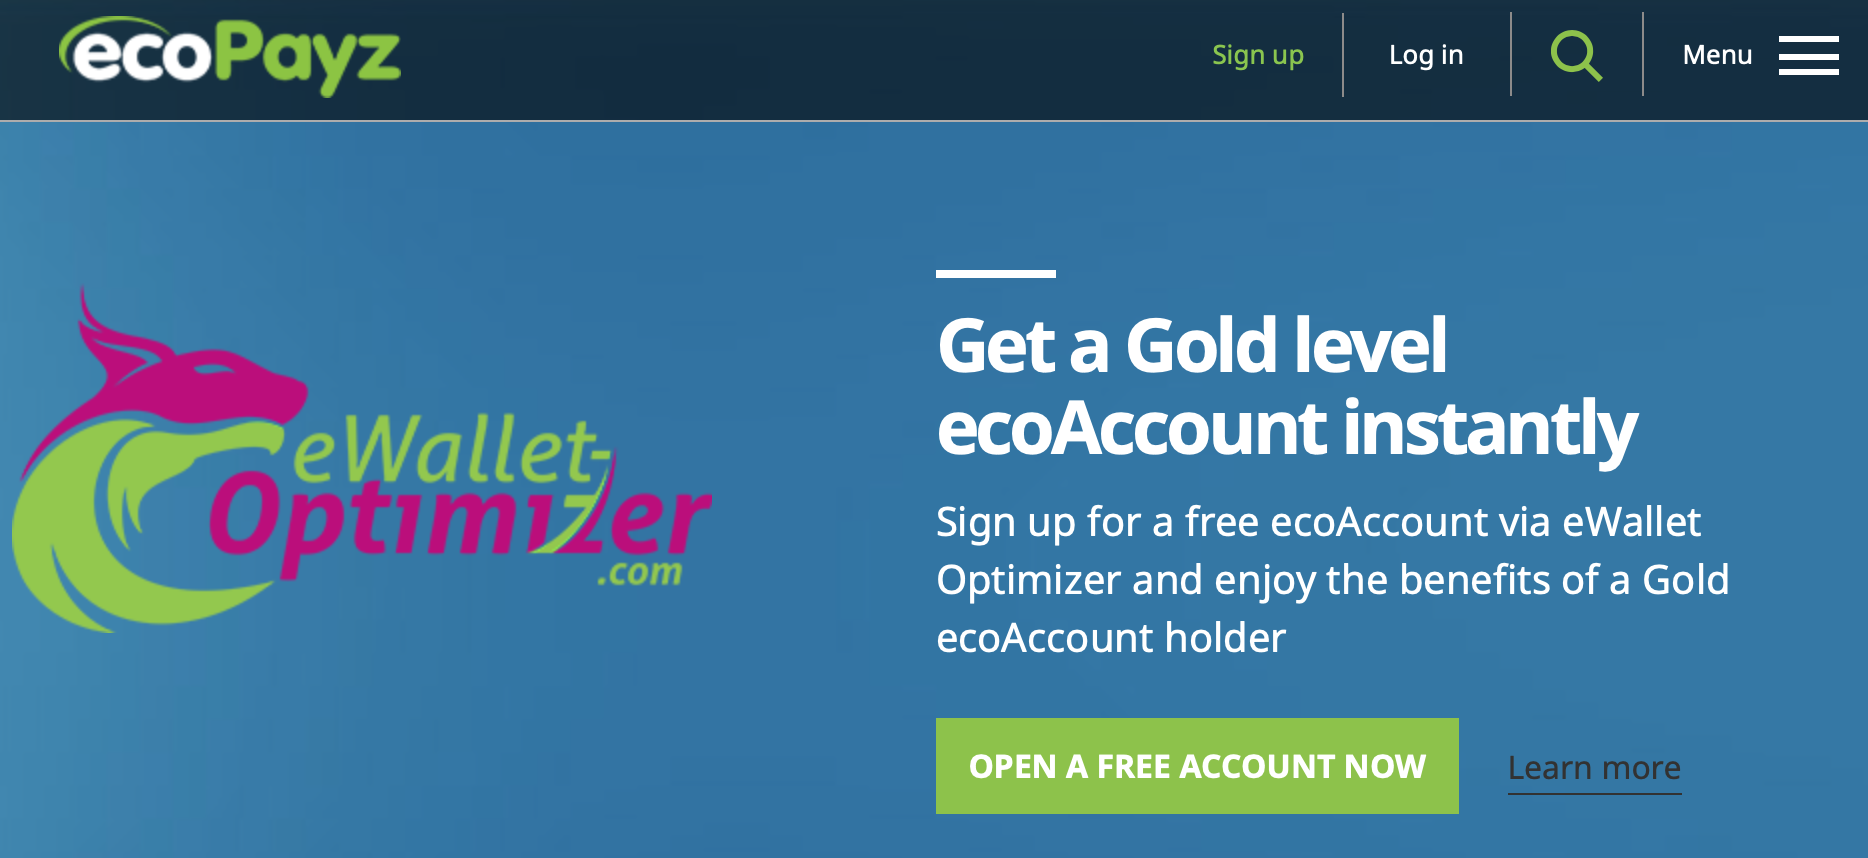 About - ecoPayz Banner